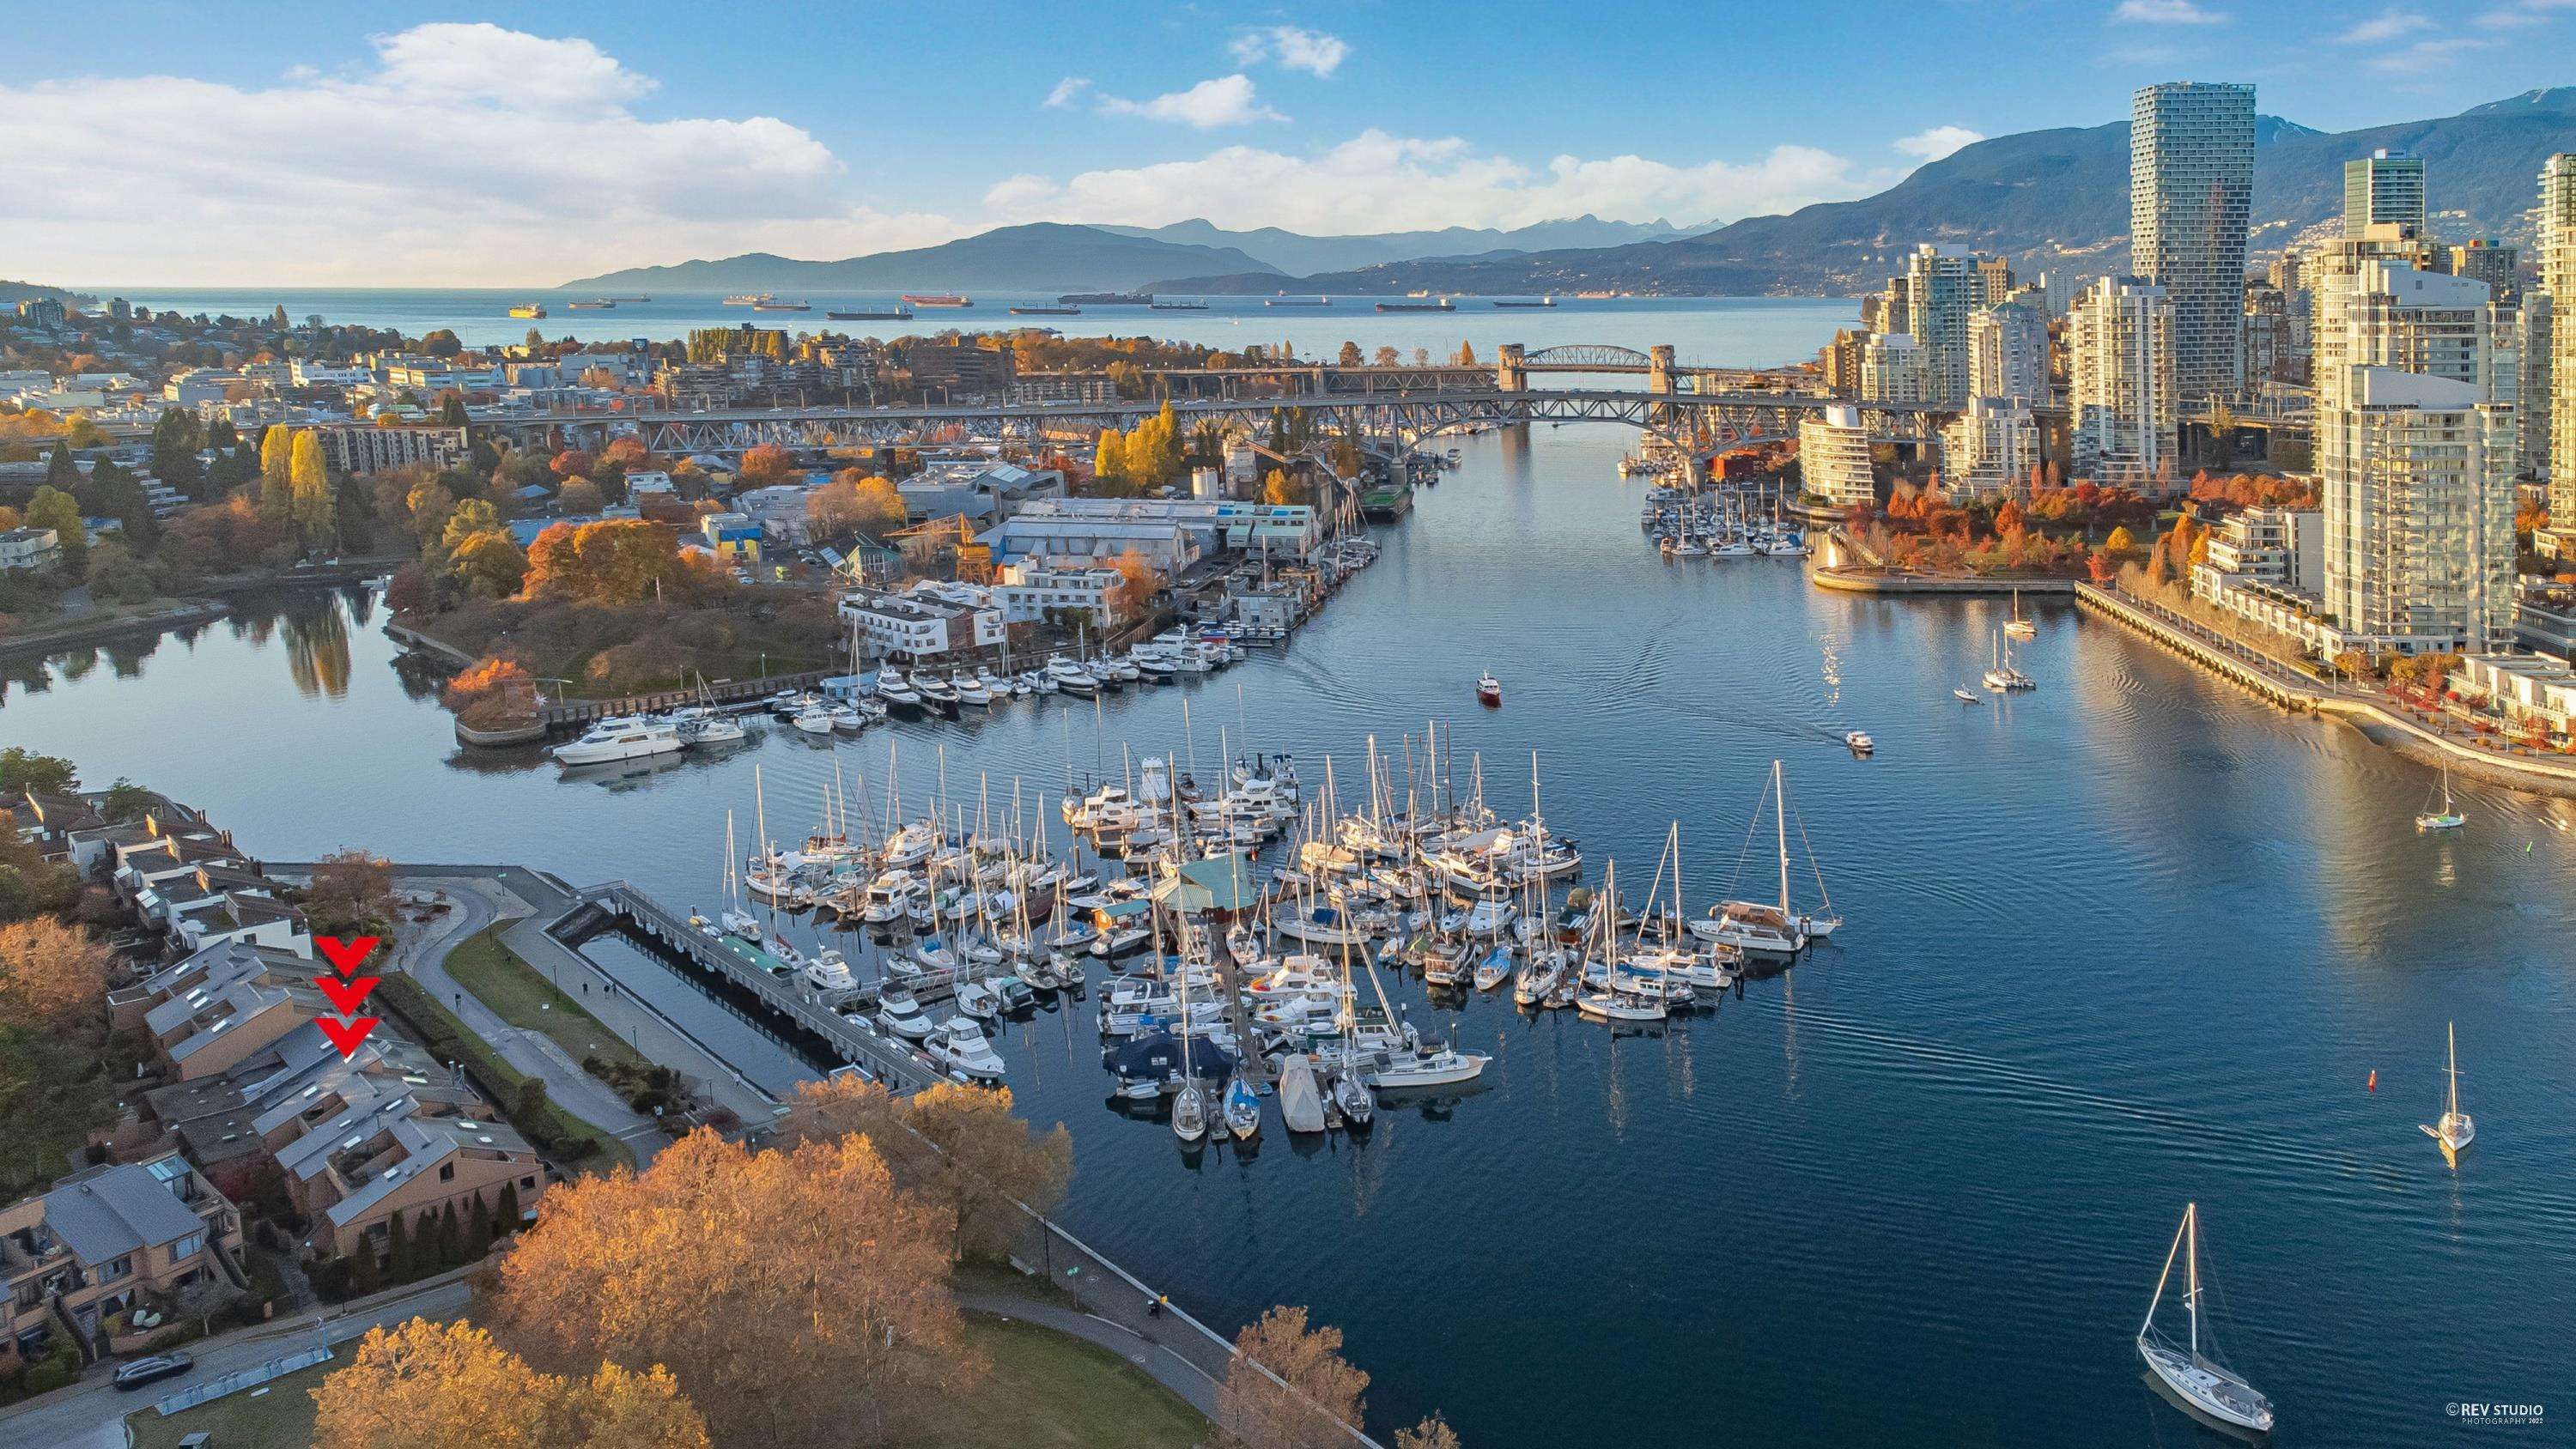 Open House. Open House on Sunday, February 26, 2023 2:00PM - 4:00PM
WATERFRONT TOWNHOUSE w/ stunning water, marina, cityscape and mtn views. 180 degree views W out to English Bay sunsets and E to the Cambie St. Bridge sunrises. Renovation by Colbrone Arch